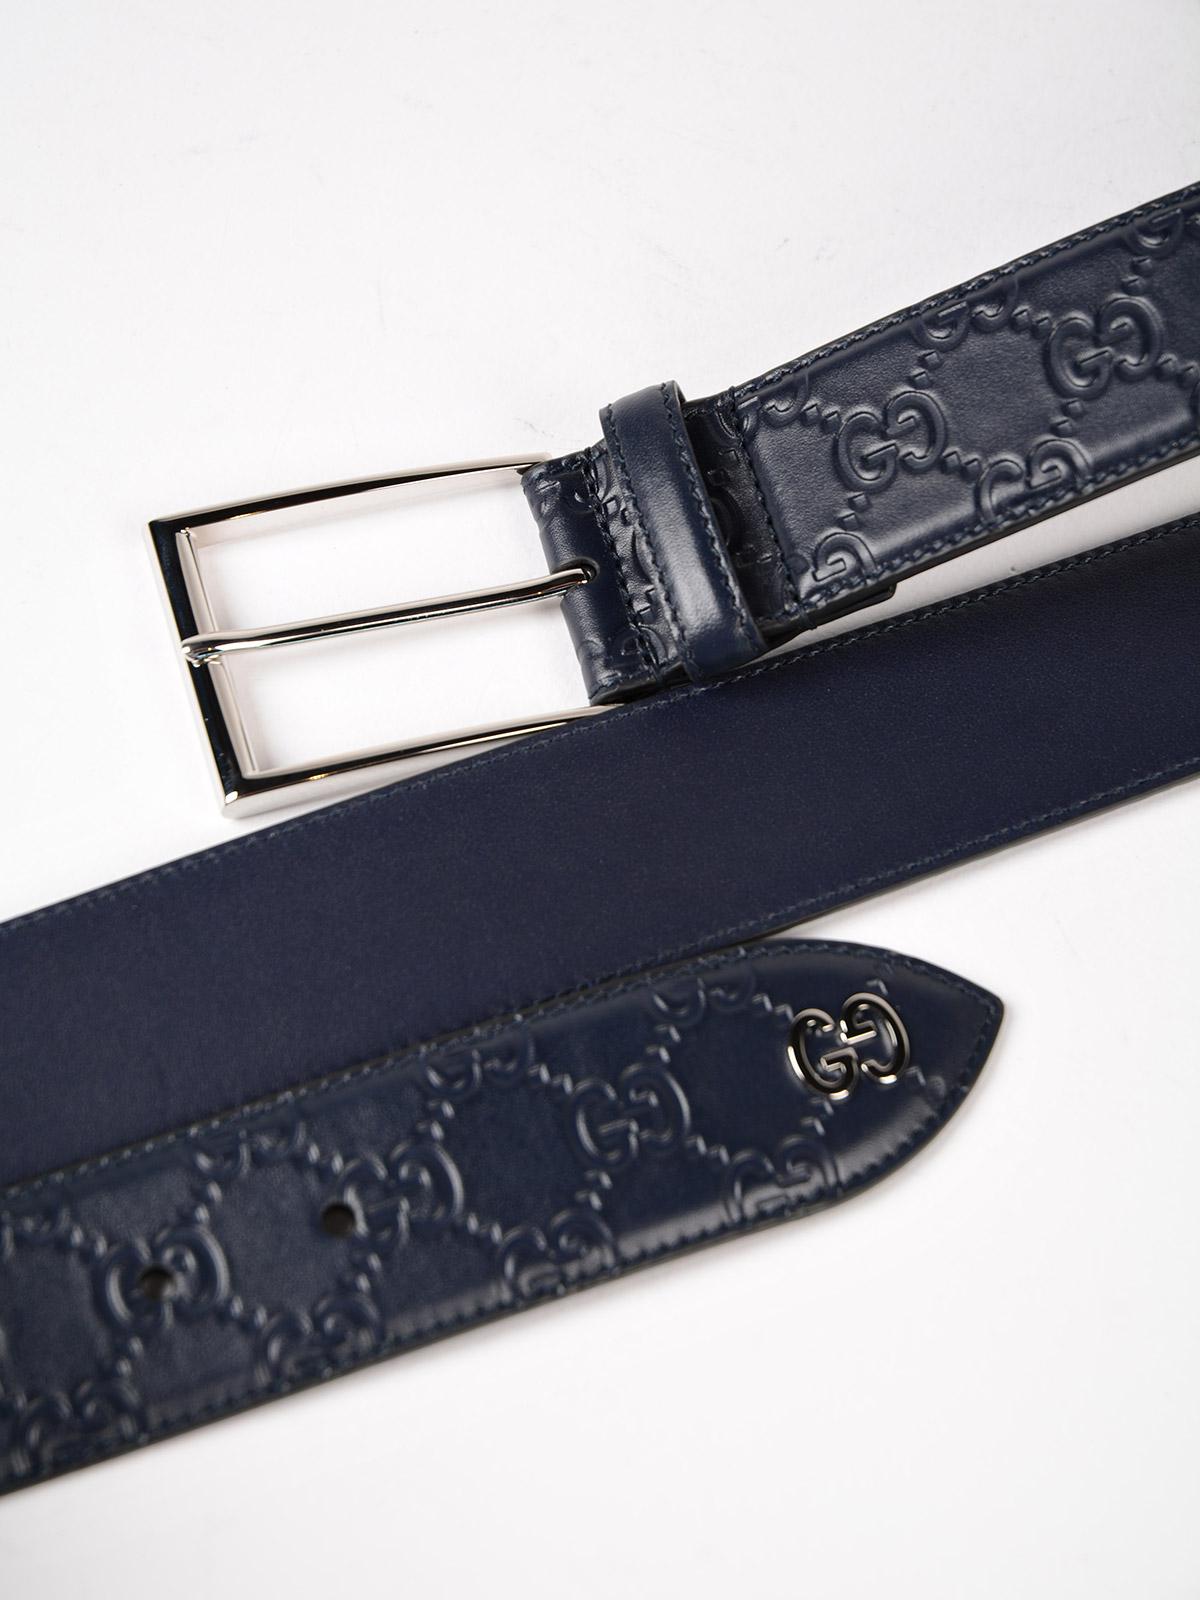 Gucci Gg Signature Leather Belt in Blue for Men - Lyst